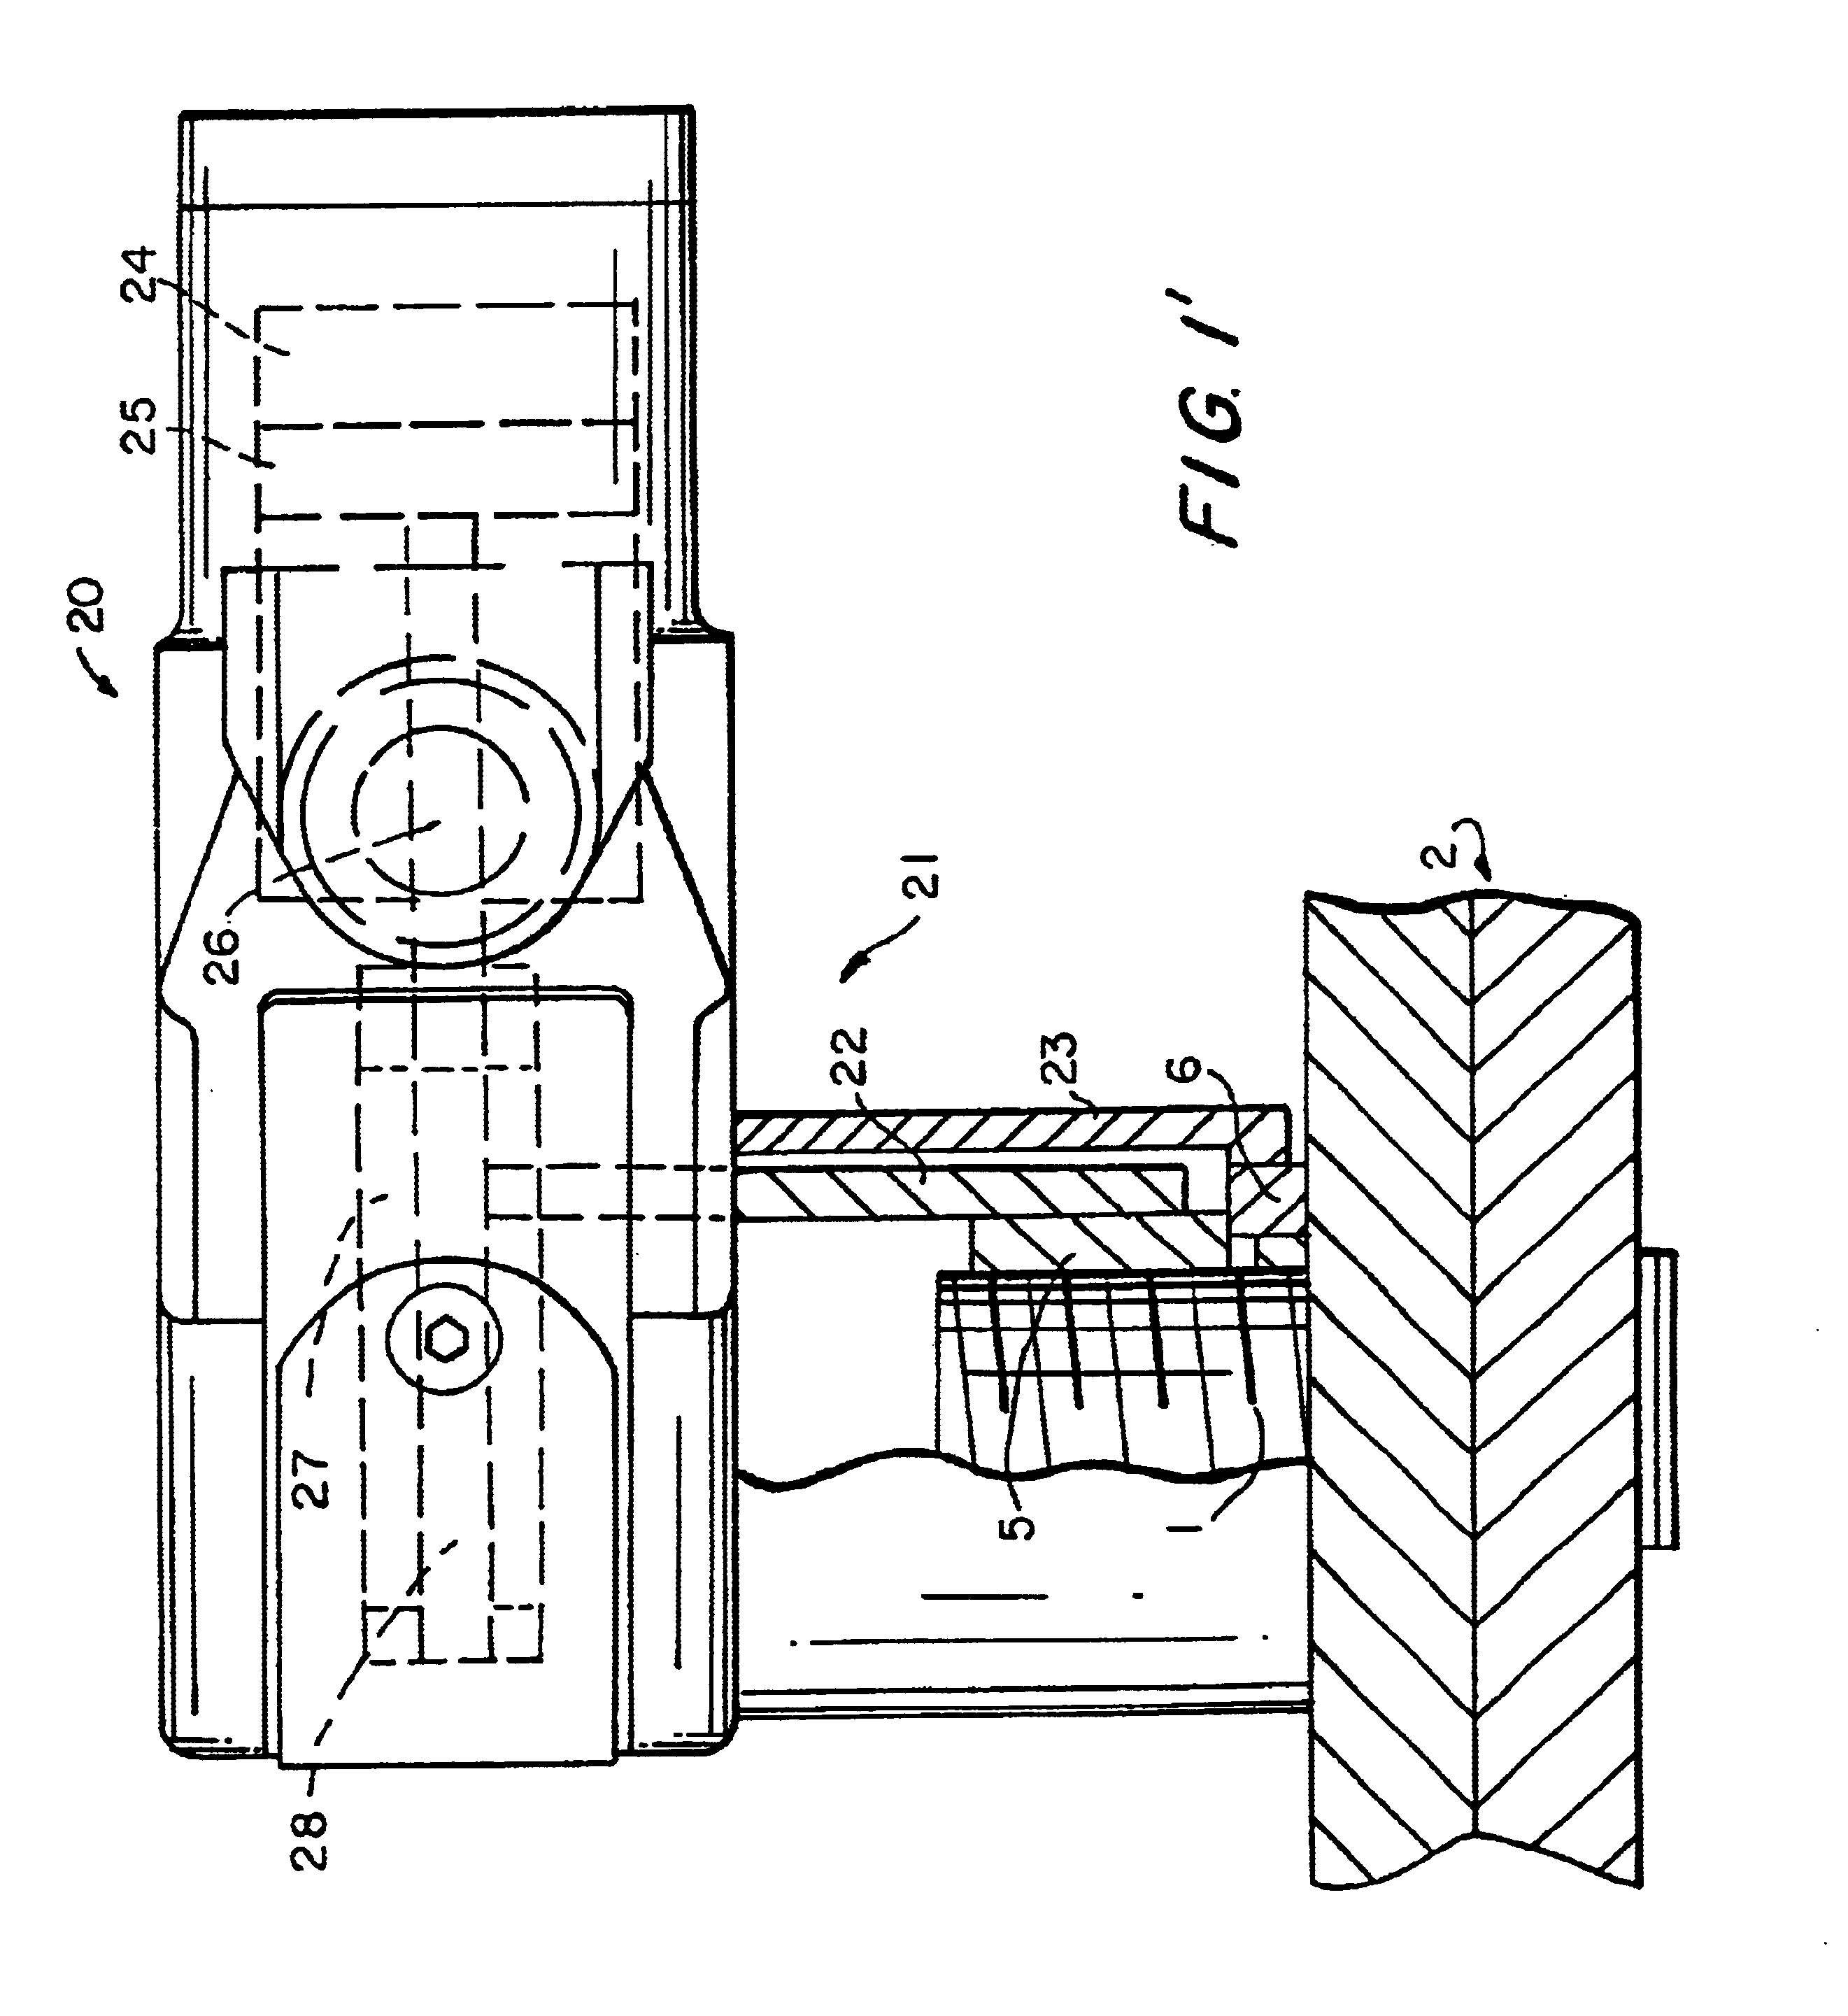 Power tool for fastening objects